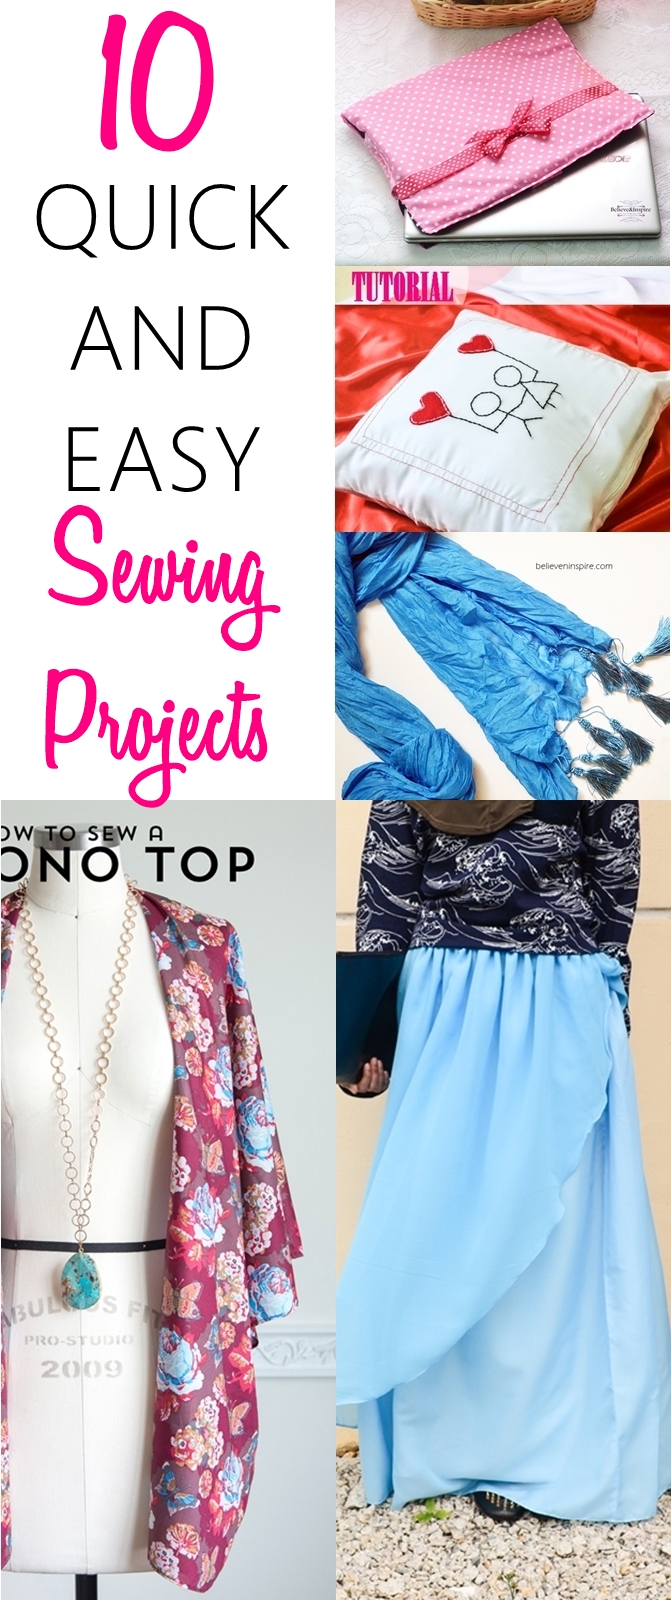 10 BEST Quick and Easy Sewing Projects for Beginners